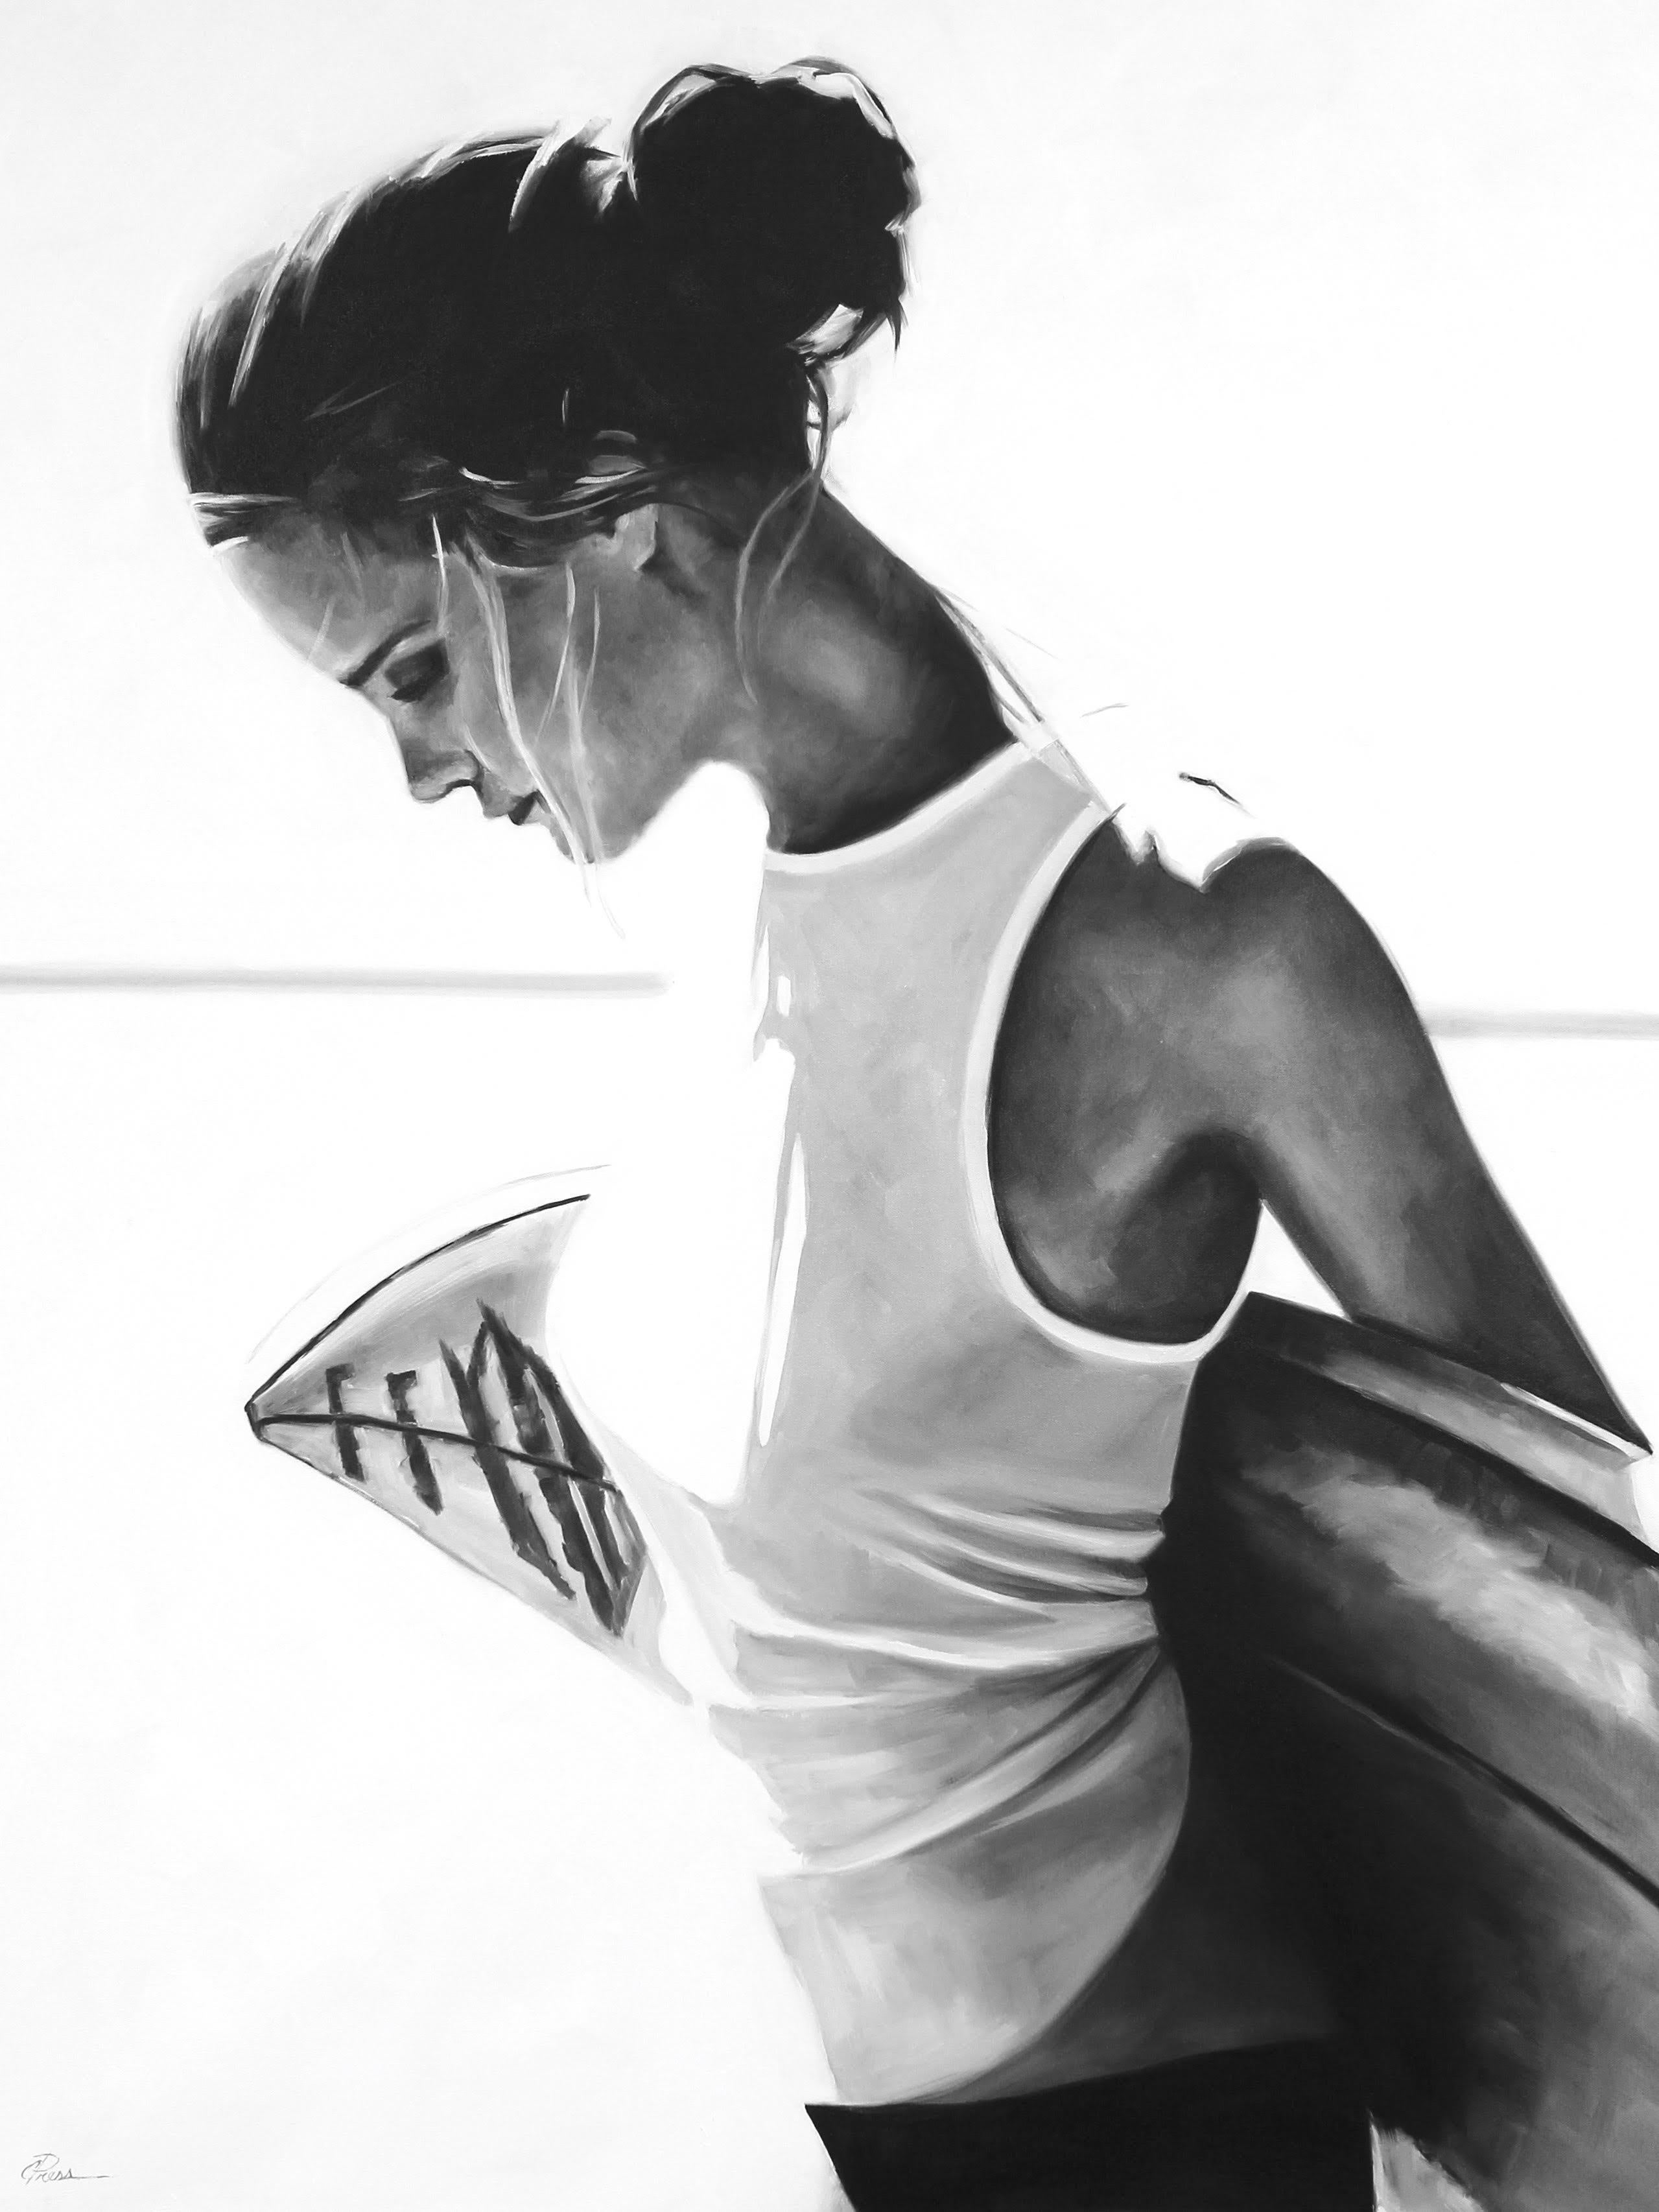 Cindy Press Figurative Painting - "Pull Me Back" black and white oil painting of woman carrying surfboard behind